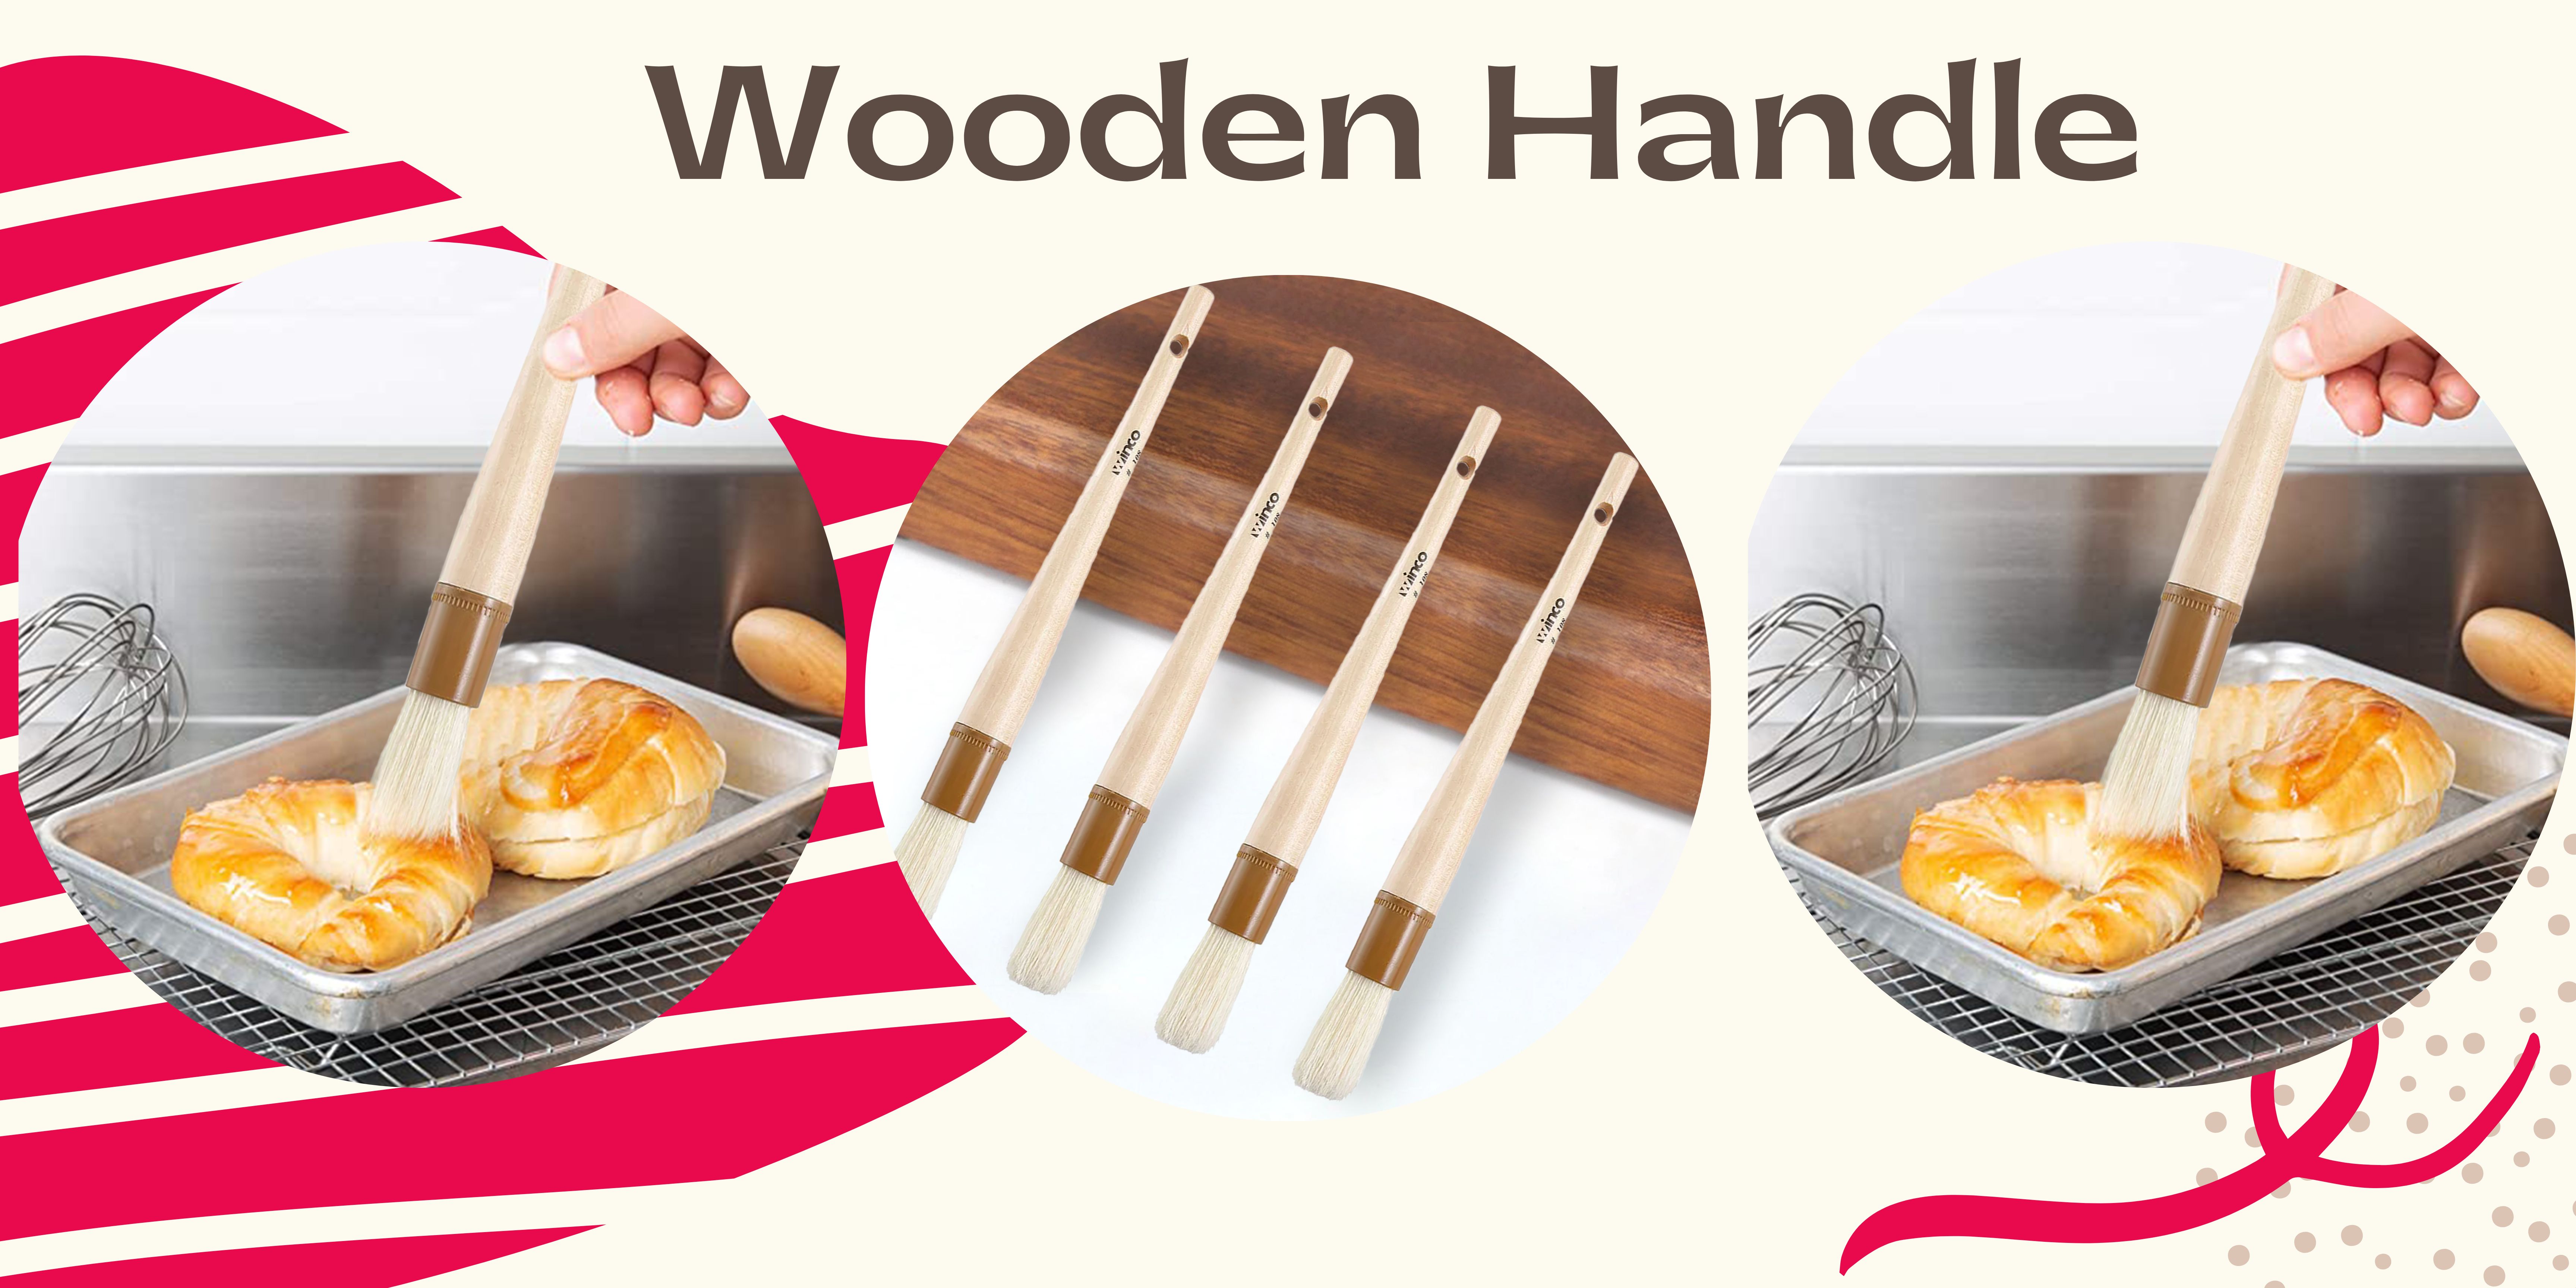 https://www.culinarydepotinc.com/product_images/uploaded_images/wooden-handle.jpg